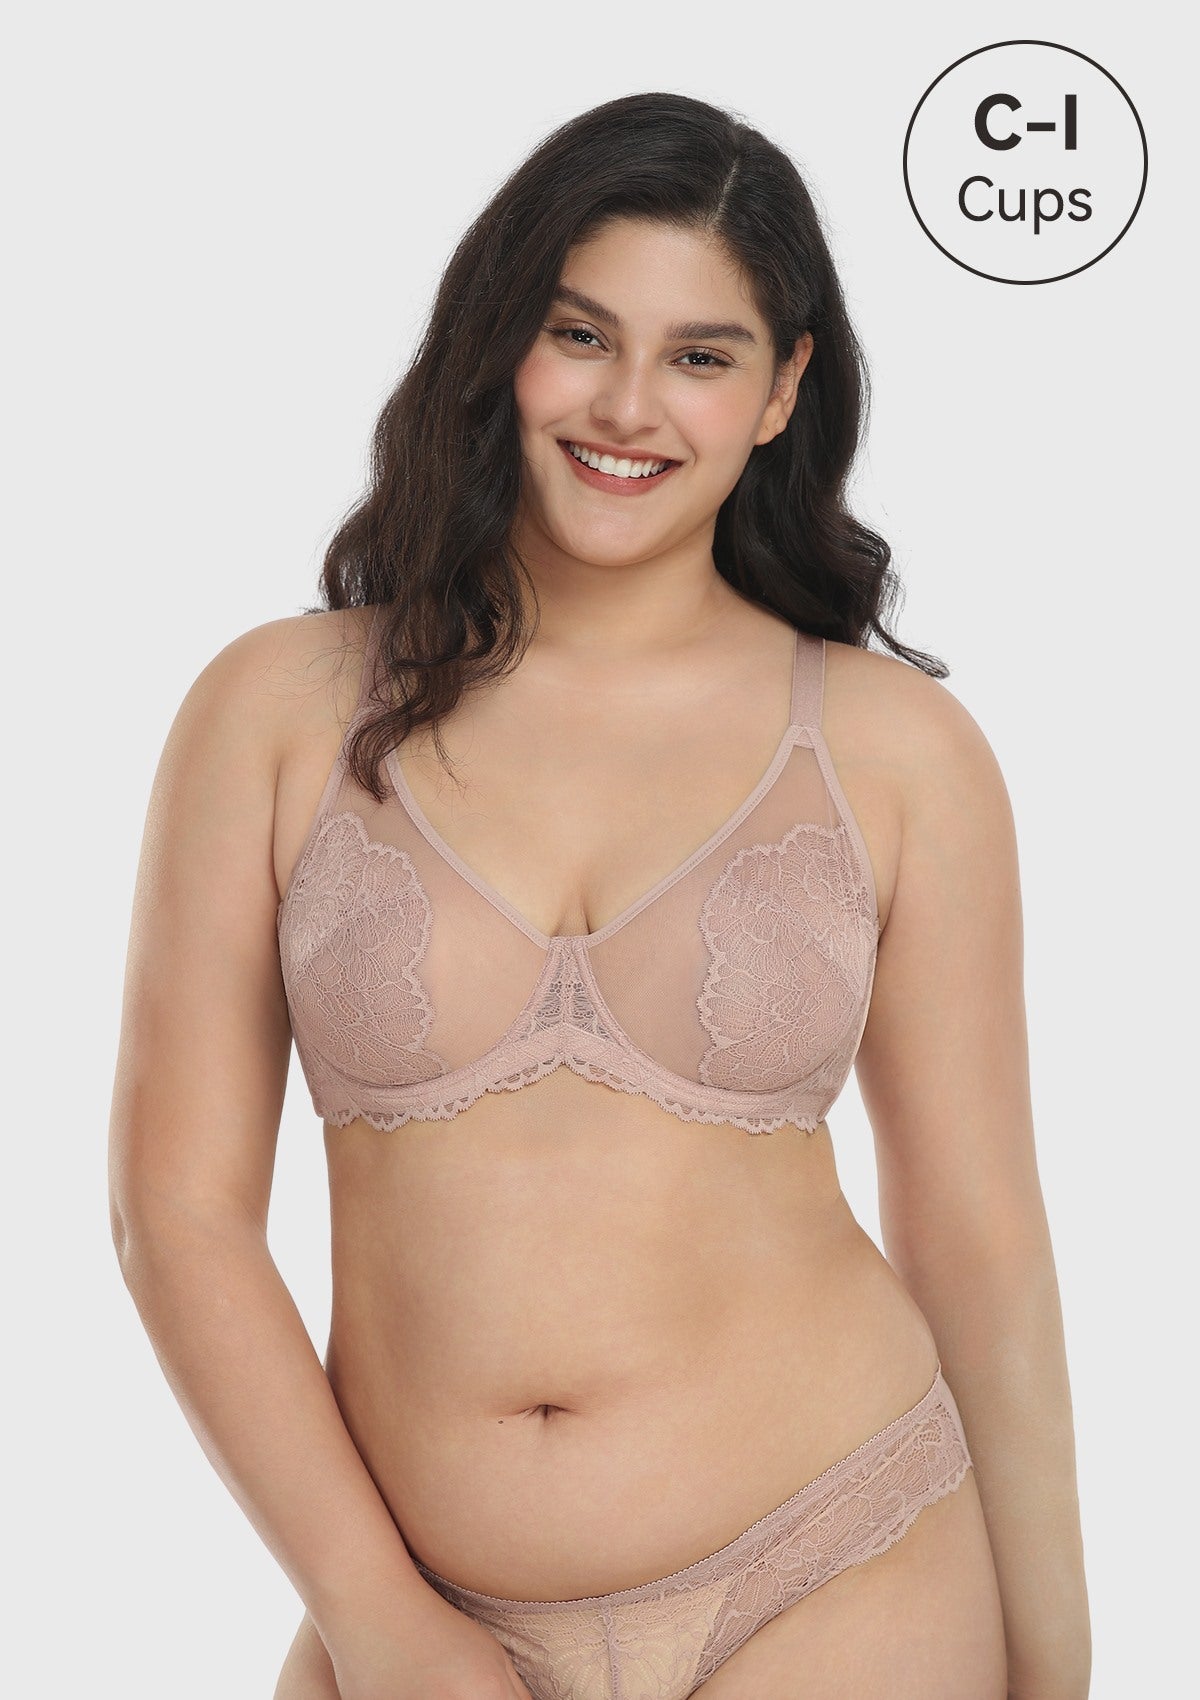 HSIA Blossom Plus Size Lace Bra - Wired, Unpadded, See-Through - Dark Pink / 42 / C